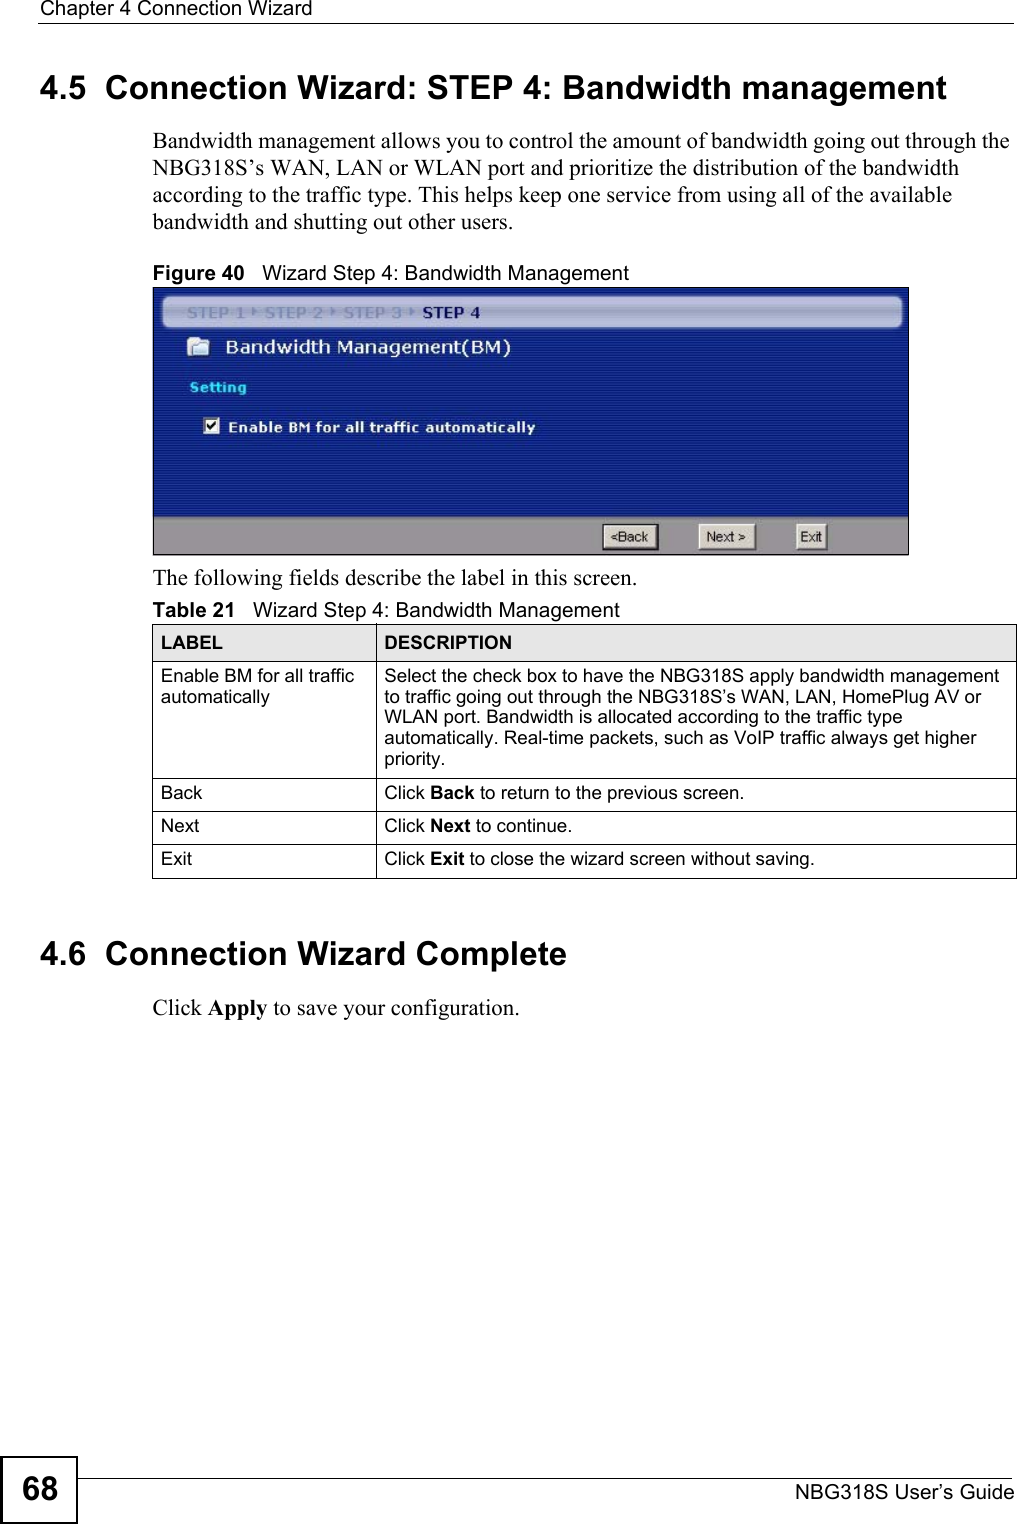 Chapter 4 Connection WizardNBG318S User’s Guide684.5  Connection Wizard: STEP 4: Bandwidth managementBandwidth management allows you to control the amount of bandwidth going out through the NBG318S’s WAN, LAN or WLAN port and prioritize the distribution of the bandwidth according to the traffic type. This helps keep one service from using all of the available bandwidth and shutting out other users.Figure 40   Wizard Step 4: Bandwidth Management The following fields describe the label in this screen.4.6  Connection Wizard CompleteClick Apply to save your configuration.Table 21   Wizard Step 4: Bandwidth ManagementLABEL DESCRIPTIONEnable BM for all traffic automaticallySelect the check box to have the NBG318S apply bandwidth management to traffic going out through the NBG318S’s WAN, LAN, HomePlug AV or WLAN port. Bandwidth is allocated according to the traffic type automatically. Real-time packets, such as VoIP traffic always get higher priority.Back Click Back to return to the previous screen.Next Click Next to continue. Exit Click Exit to close the wizard screen without saving.